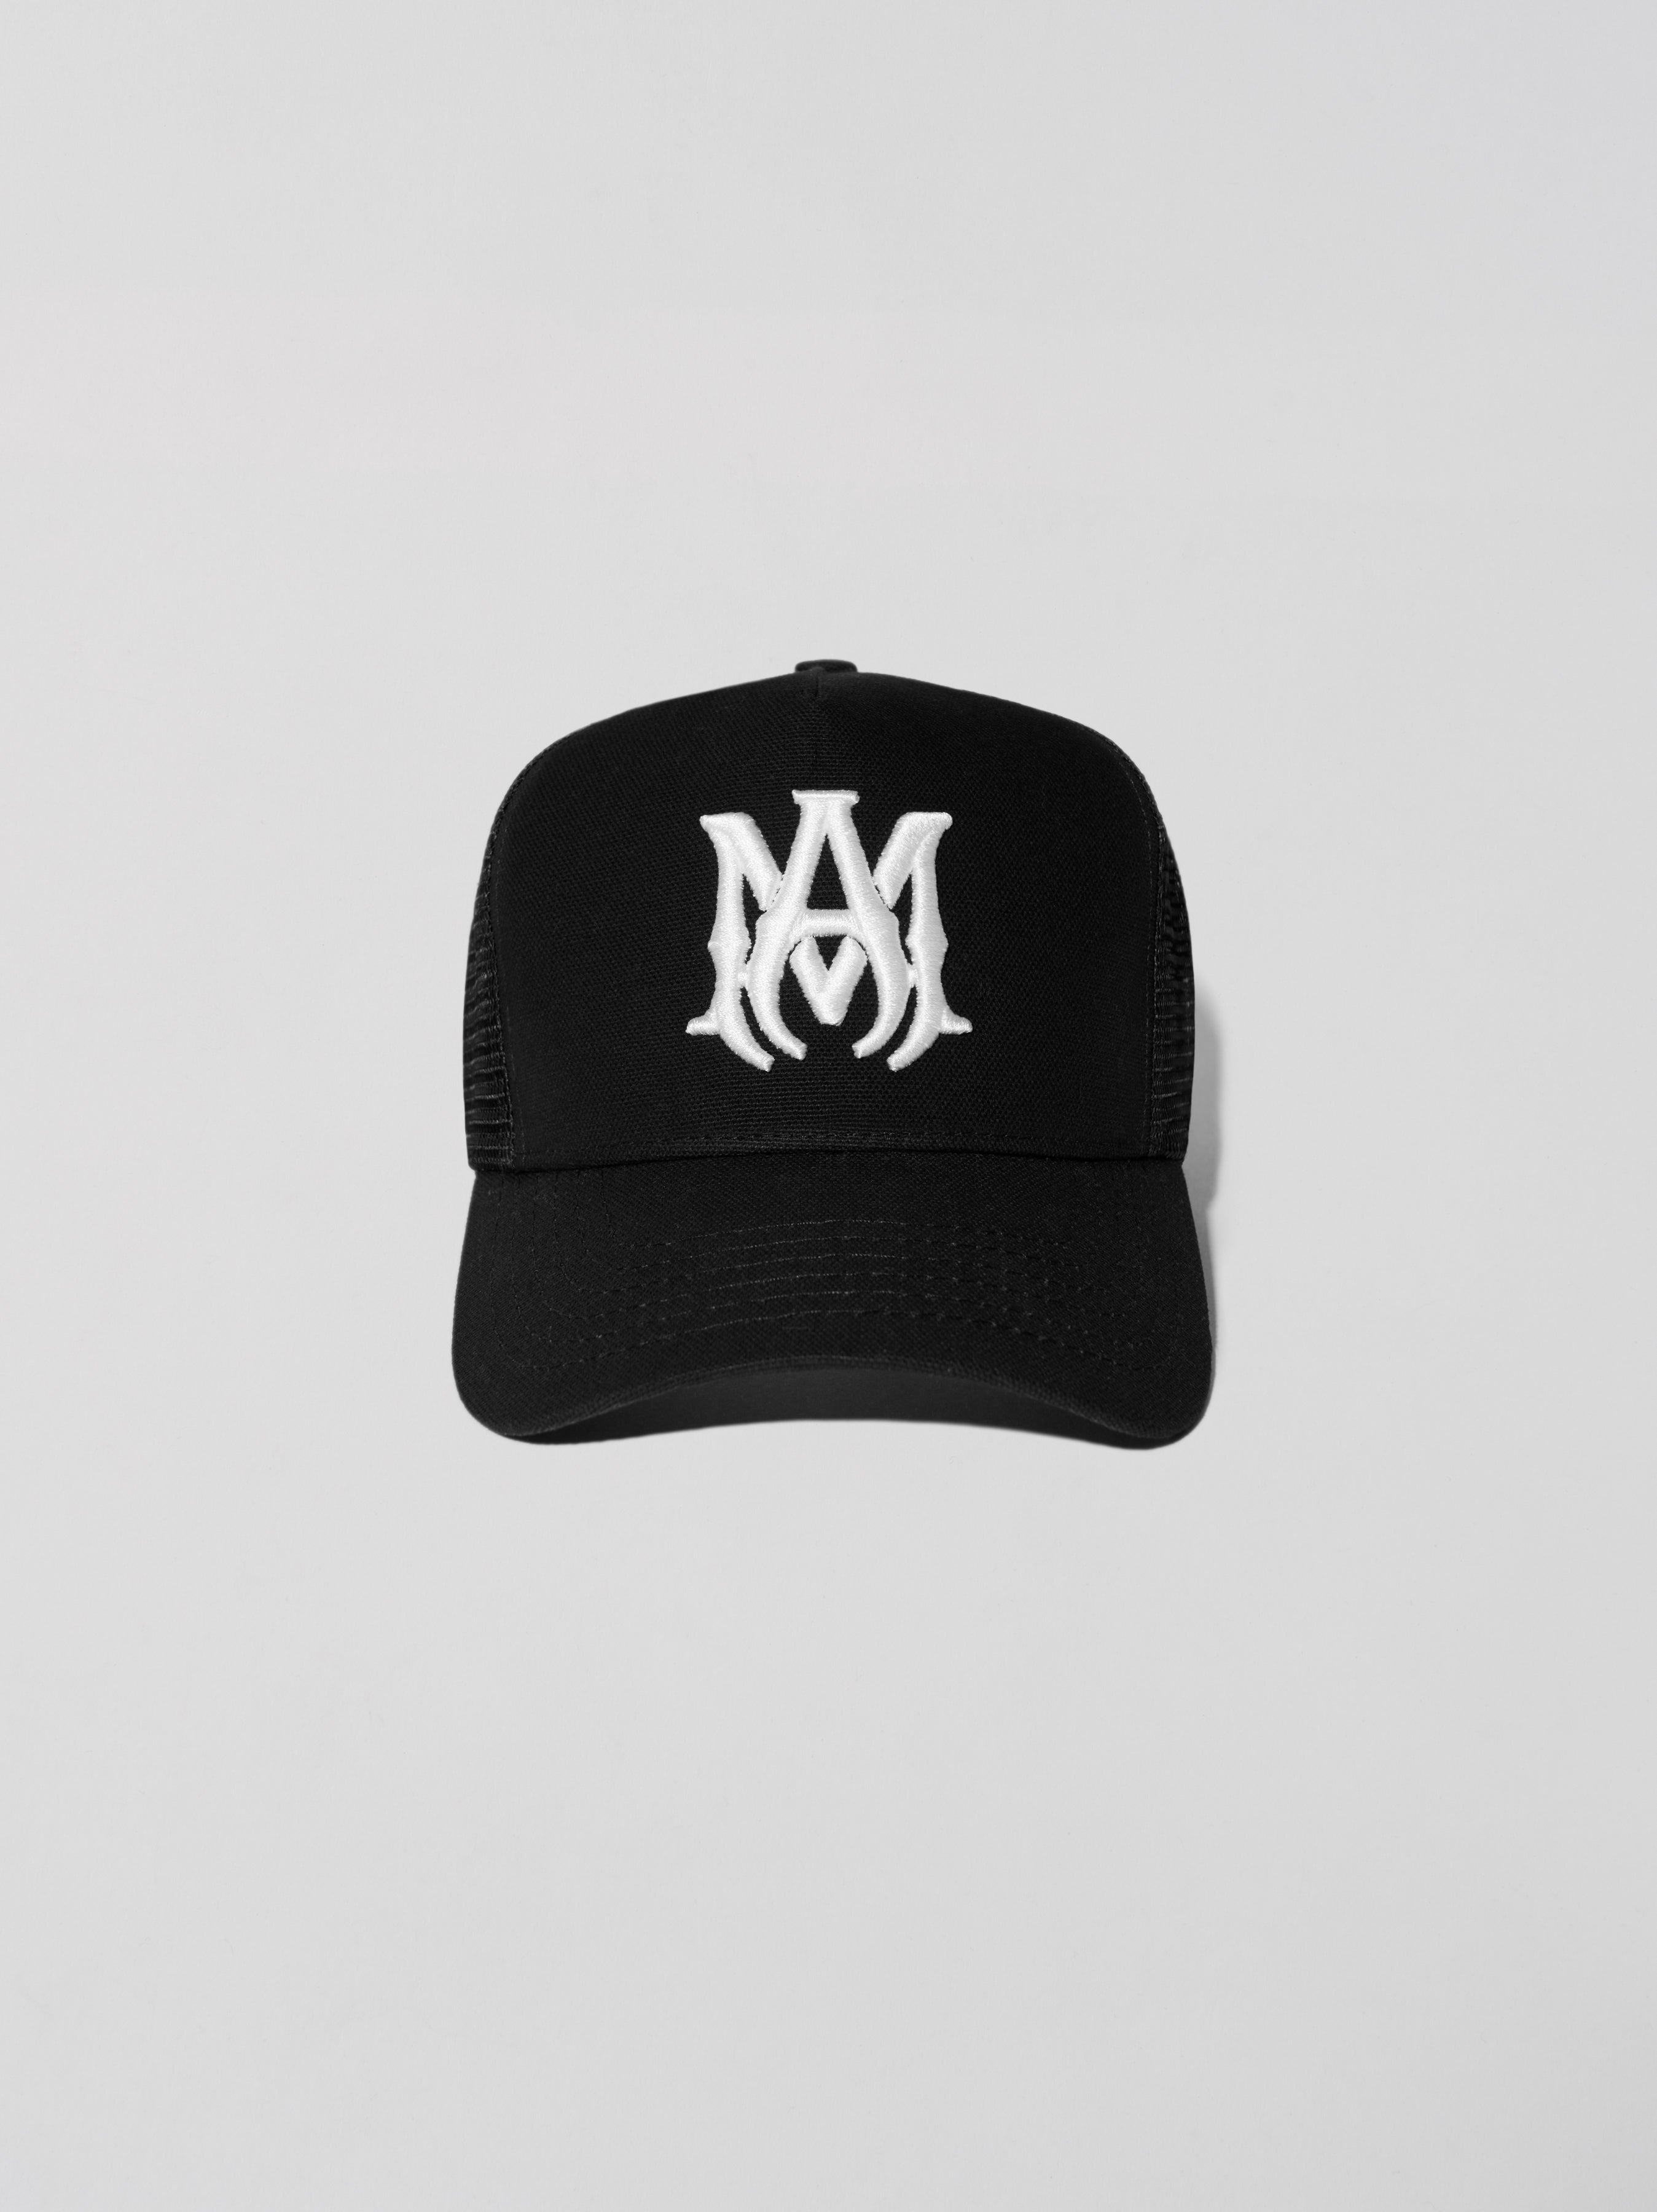 Product MA Logo Trucker Hat - Black/White featured image